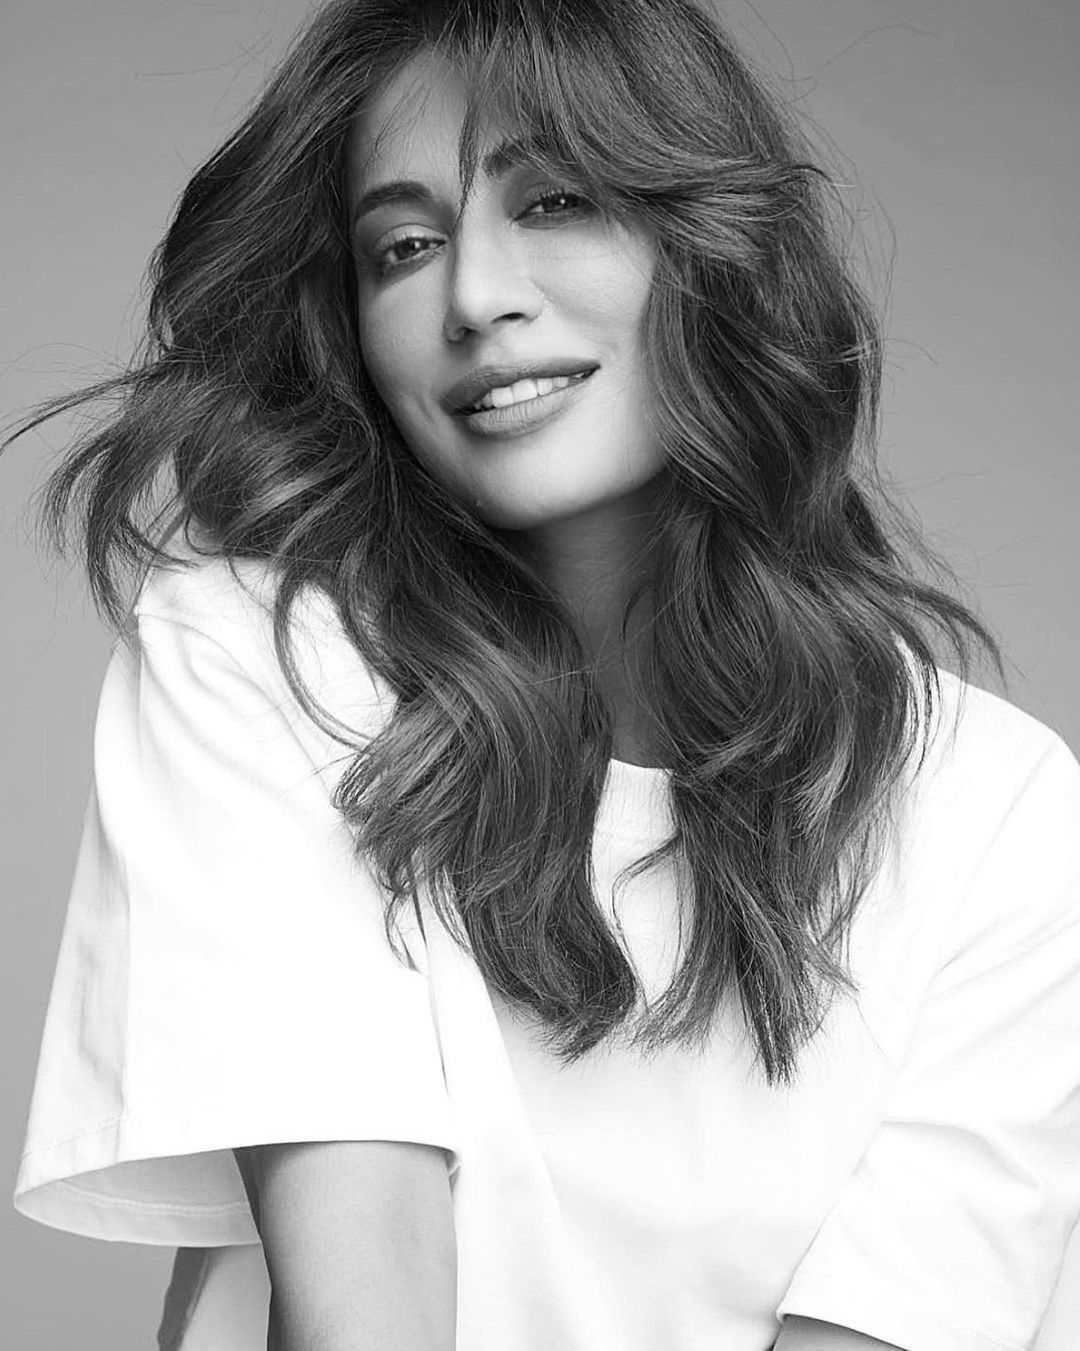 Chitrangda Singh Photoshoot in White Top and Ripped Denim, January 2022